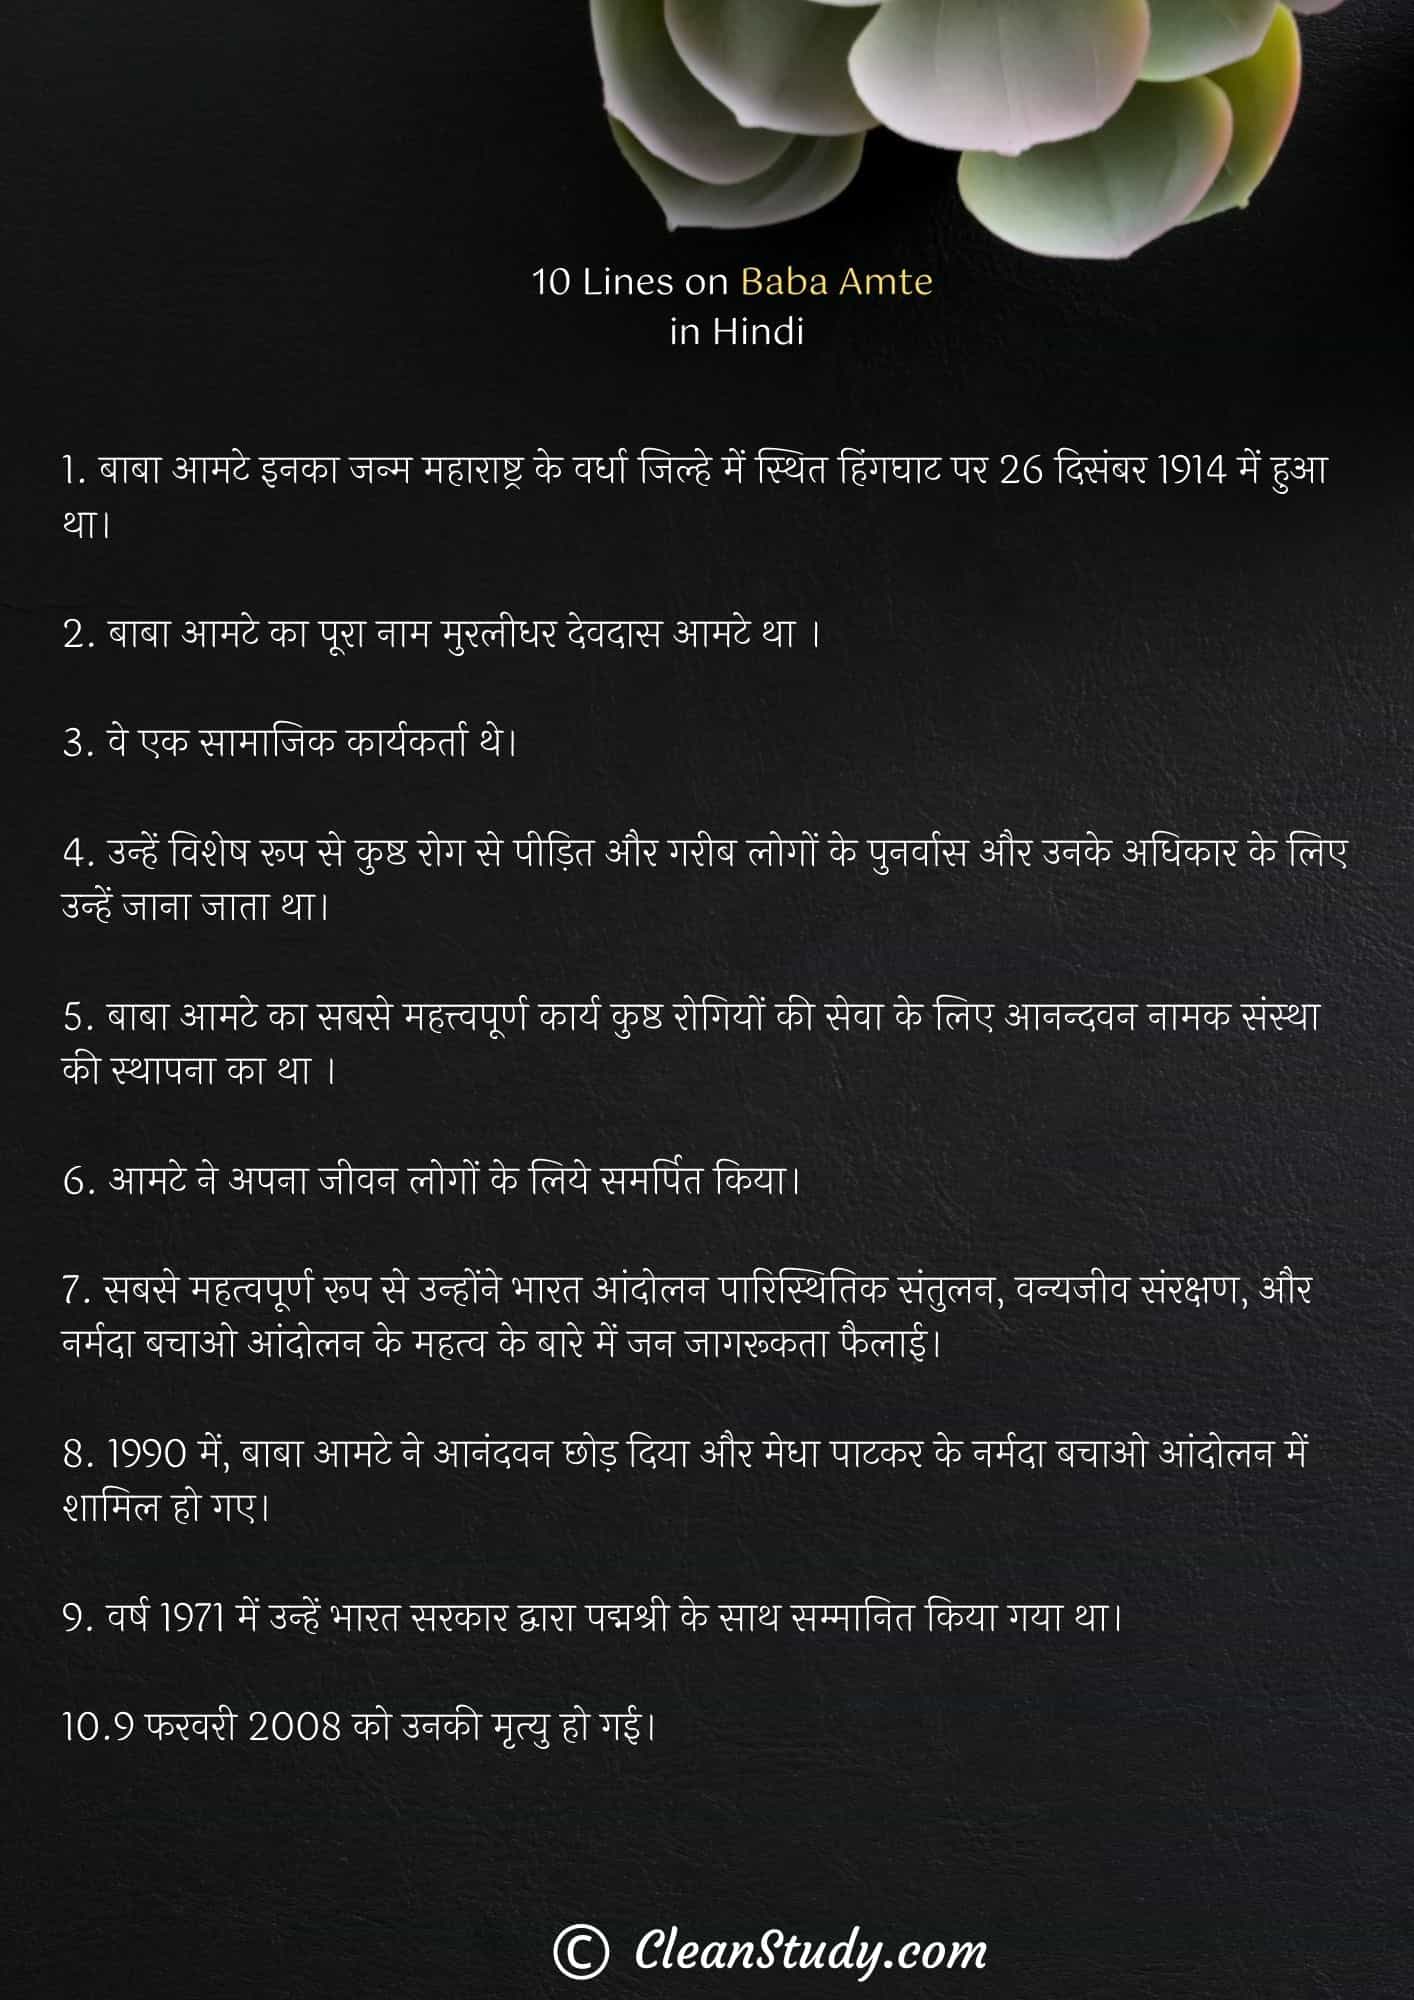 10 Lines on Baba Amte in Hindi